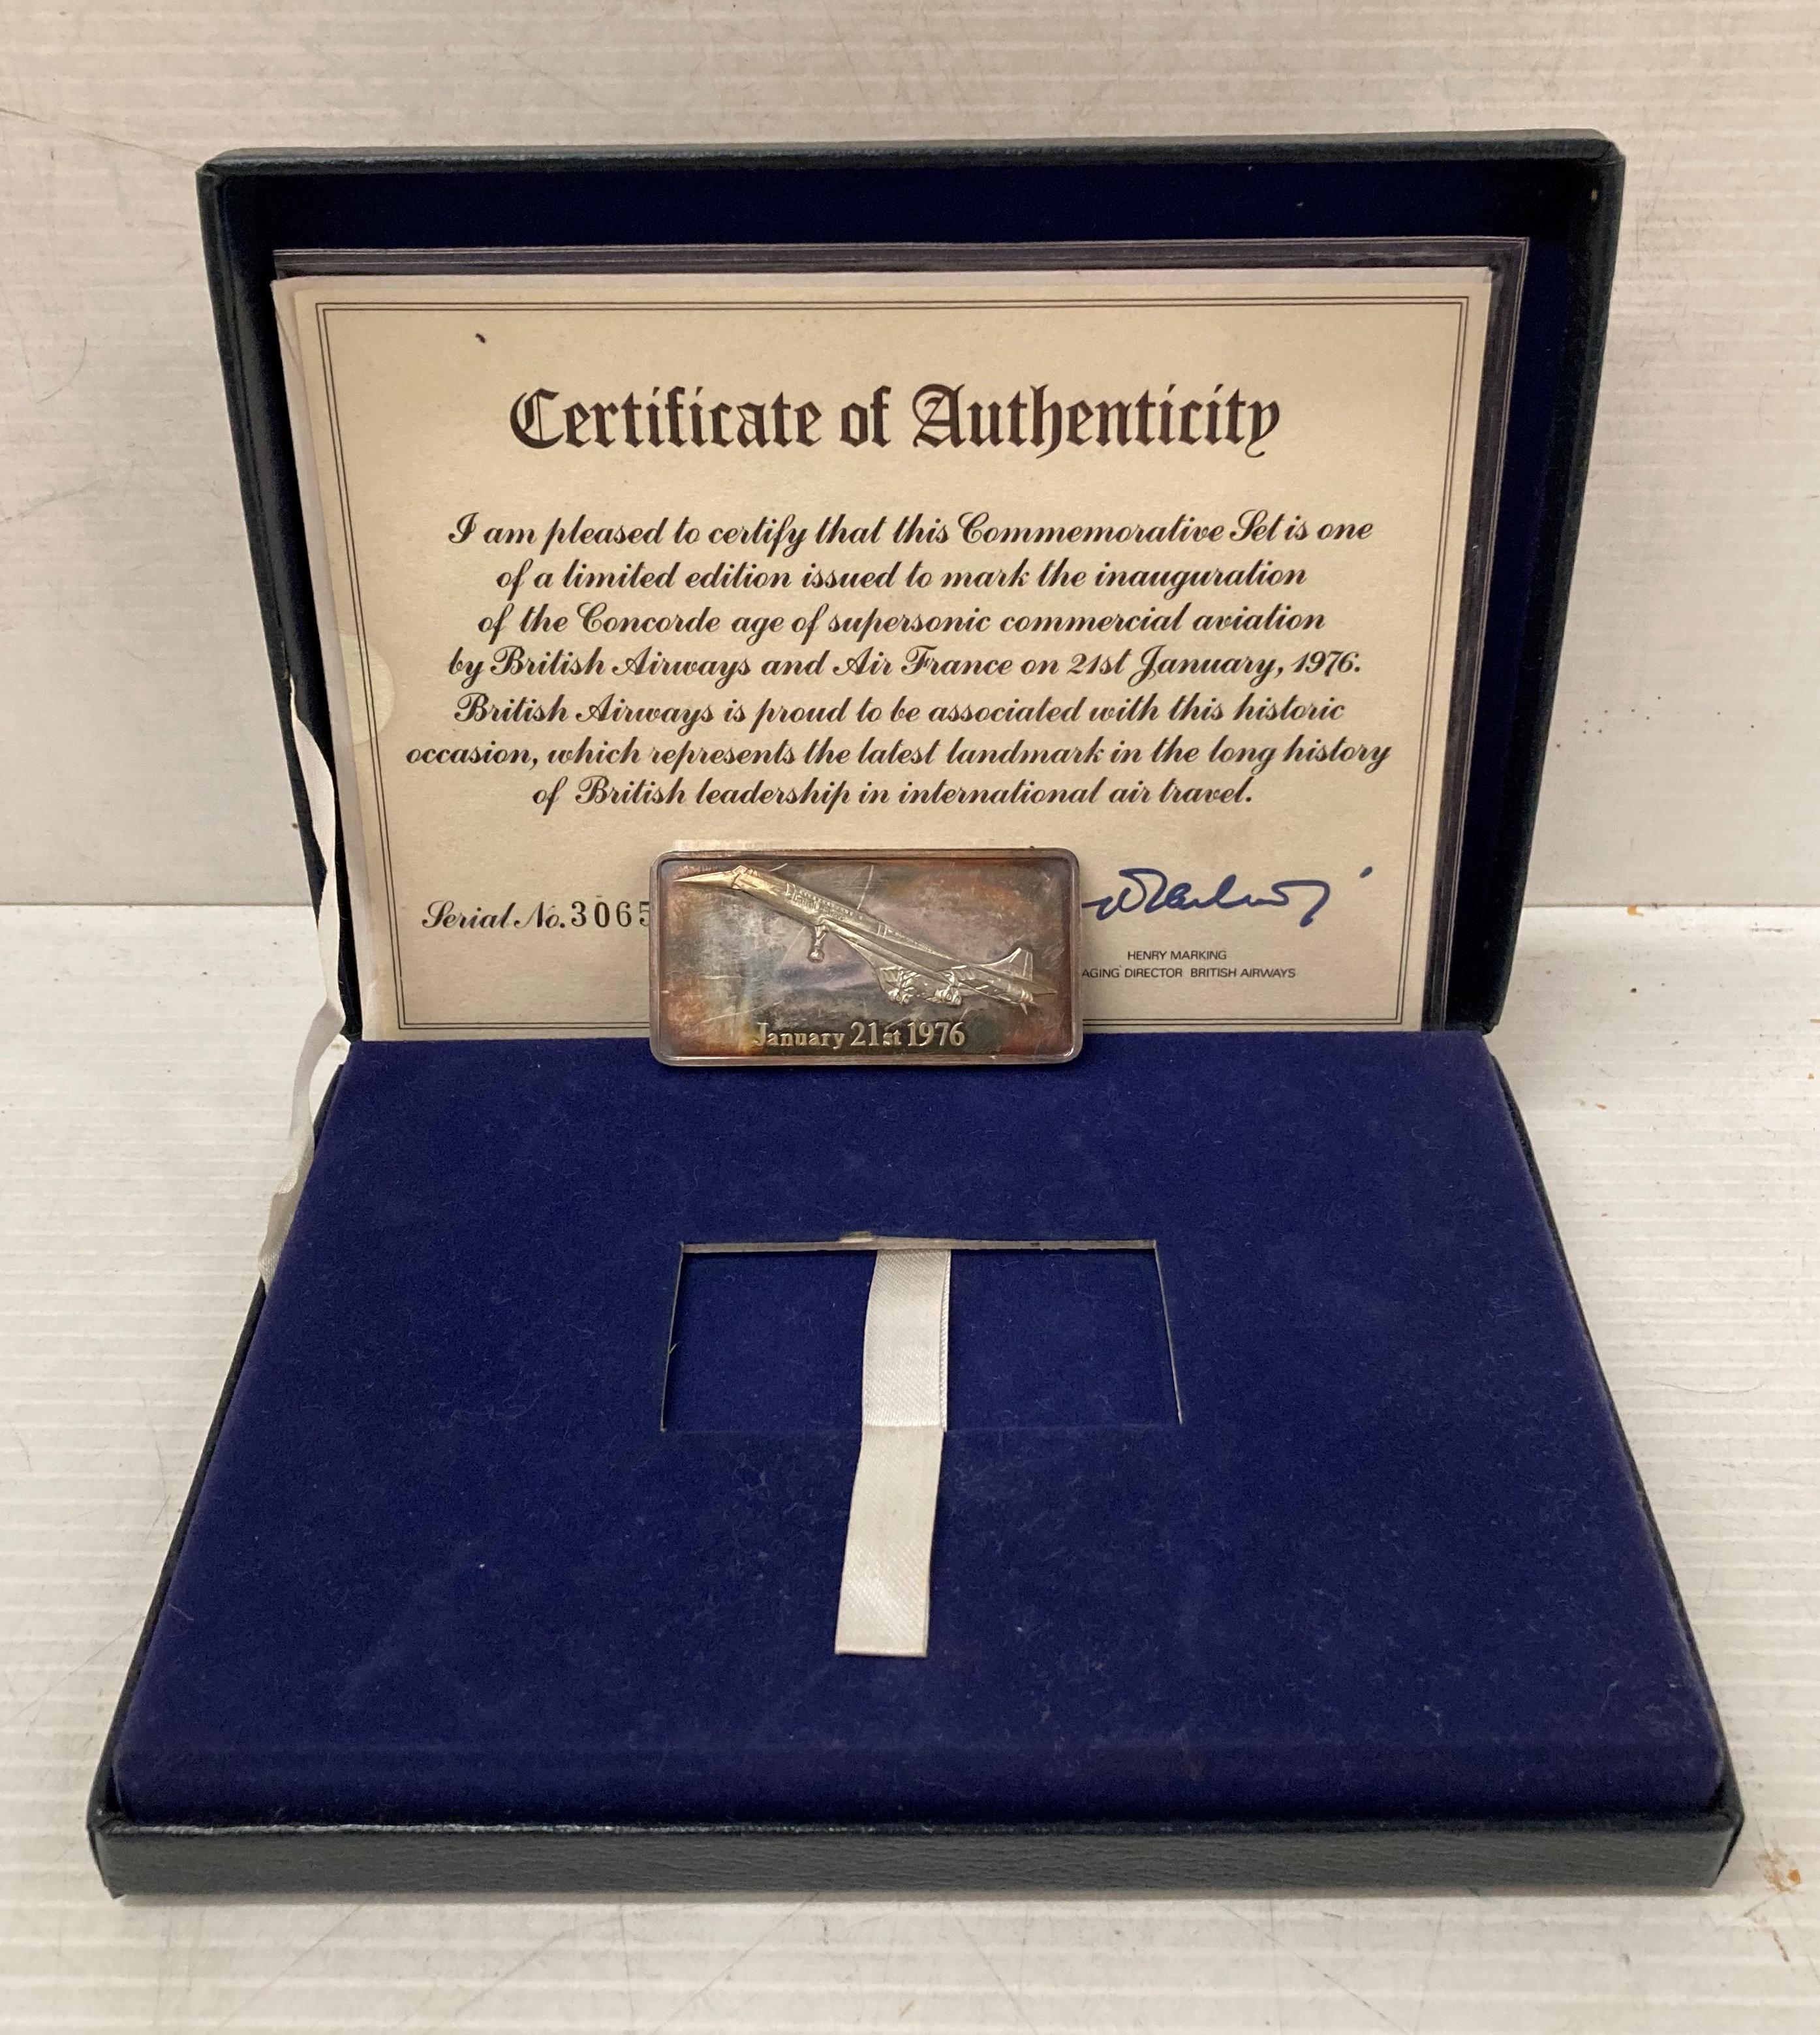 Limited edition Danbury Mint silver [hallmarked] ingot of the inauguration commemoration of